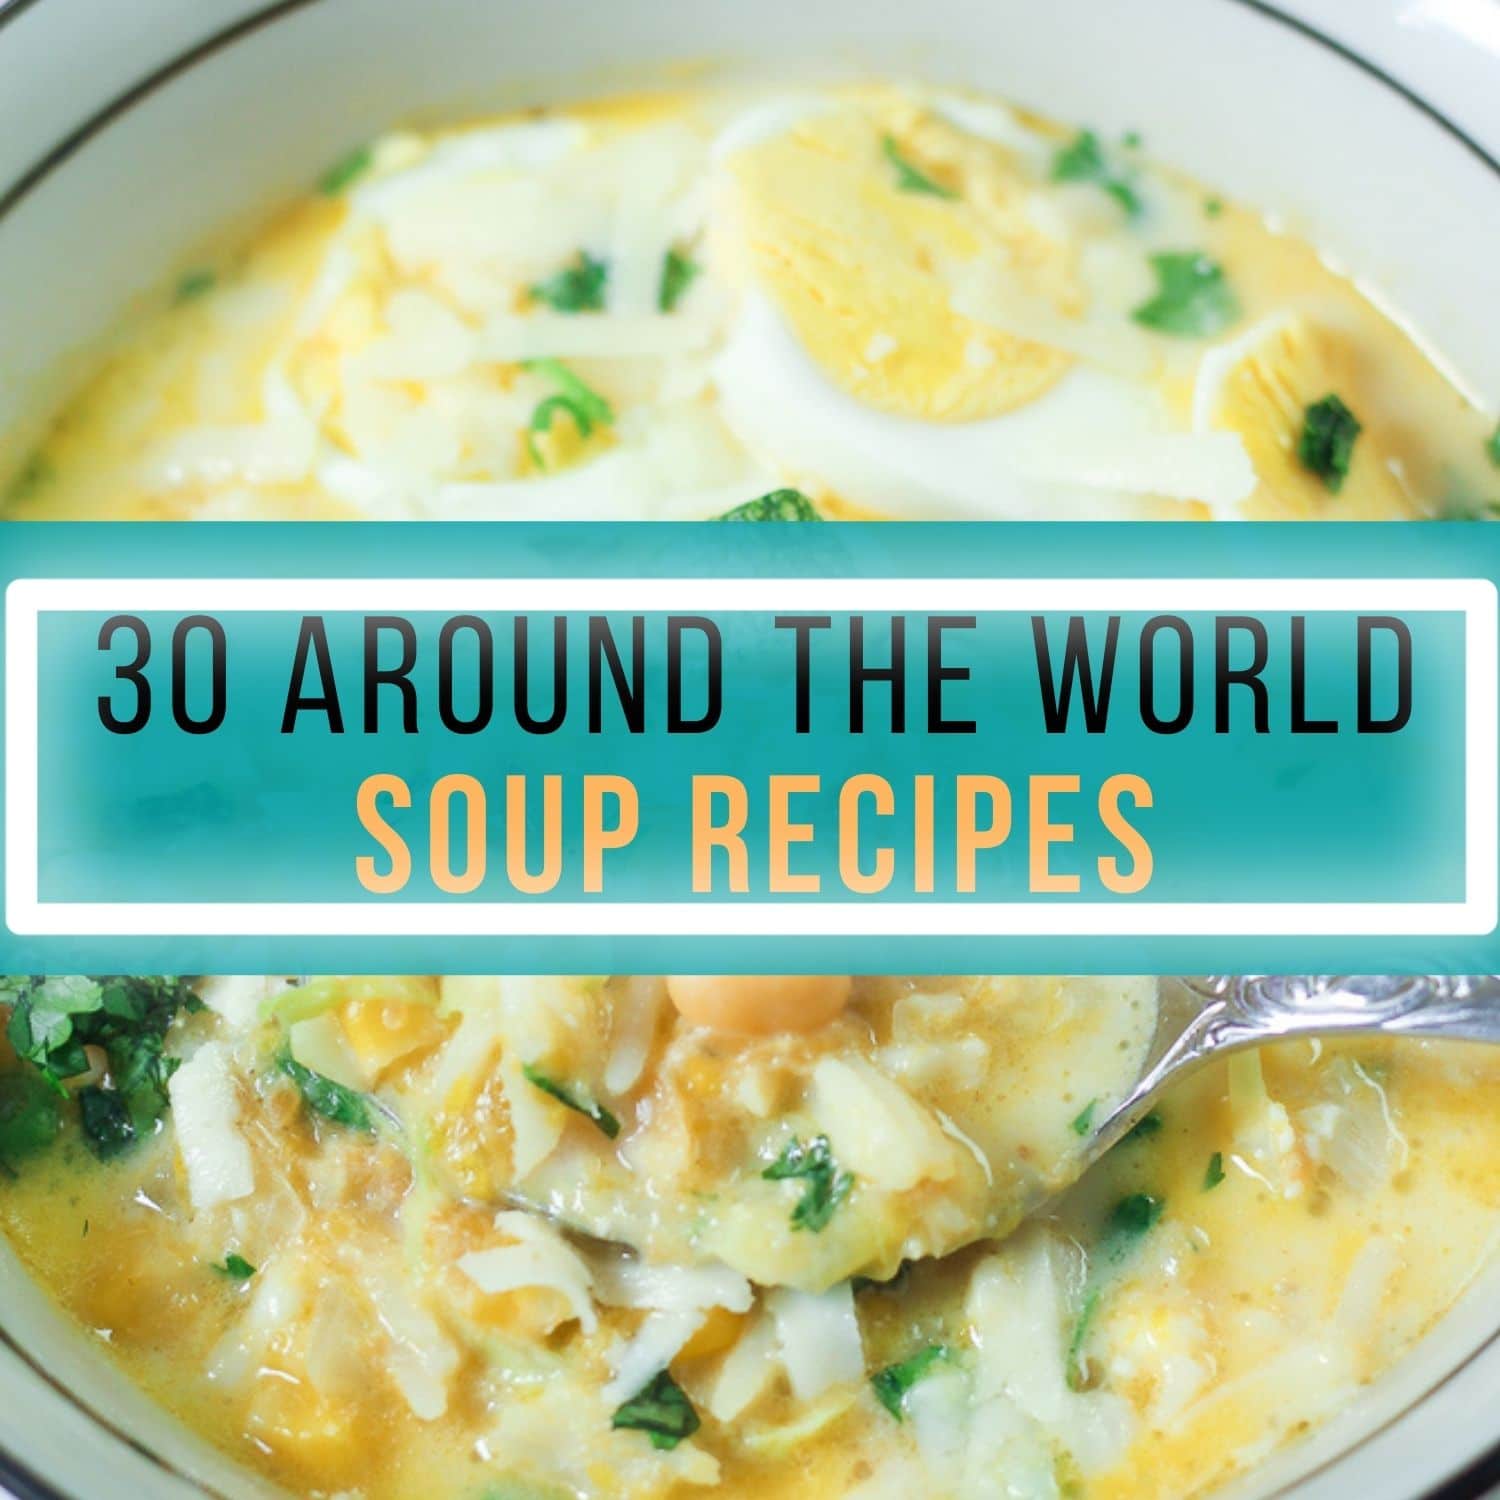 30 Best Soup Recipes - International Soup Recipes from Around the World